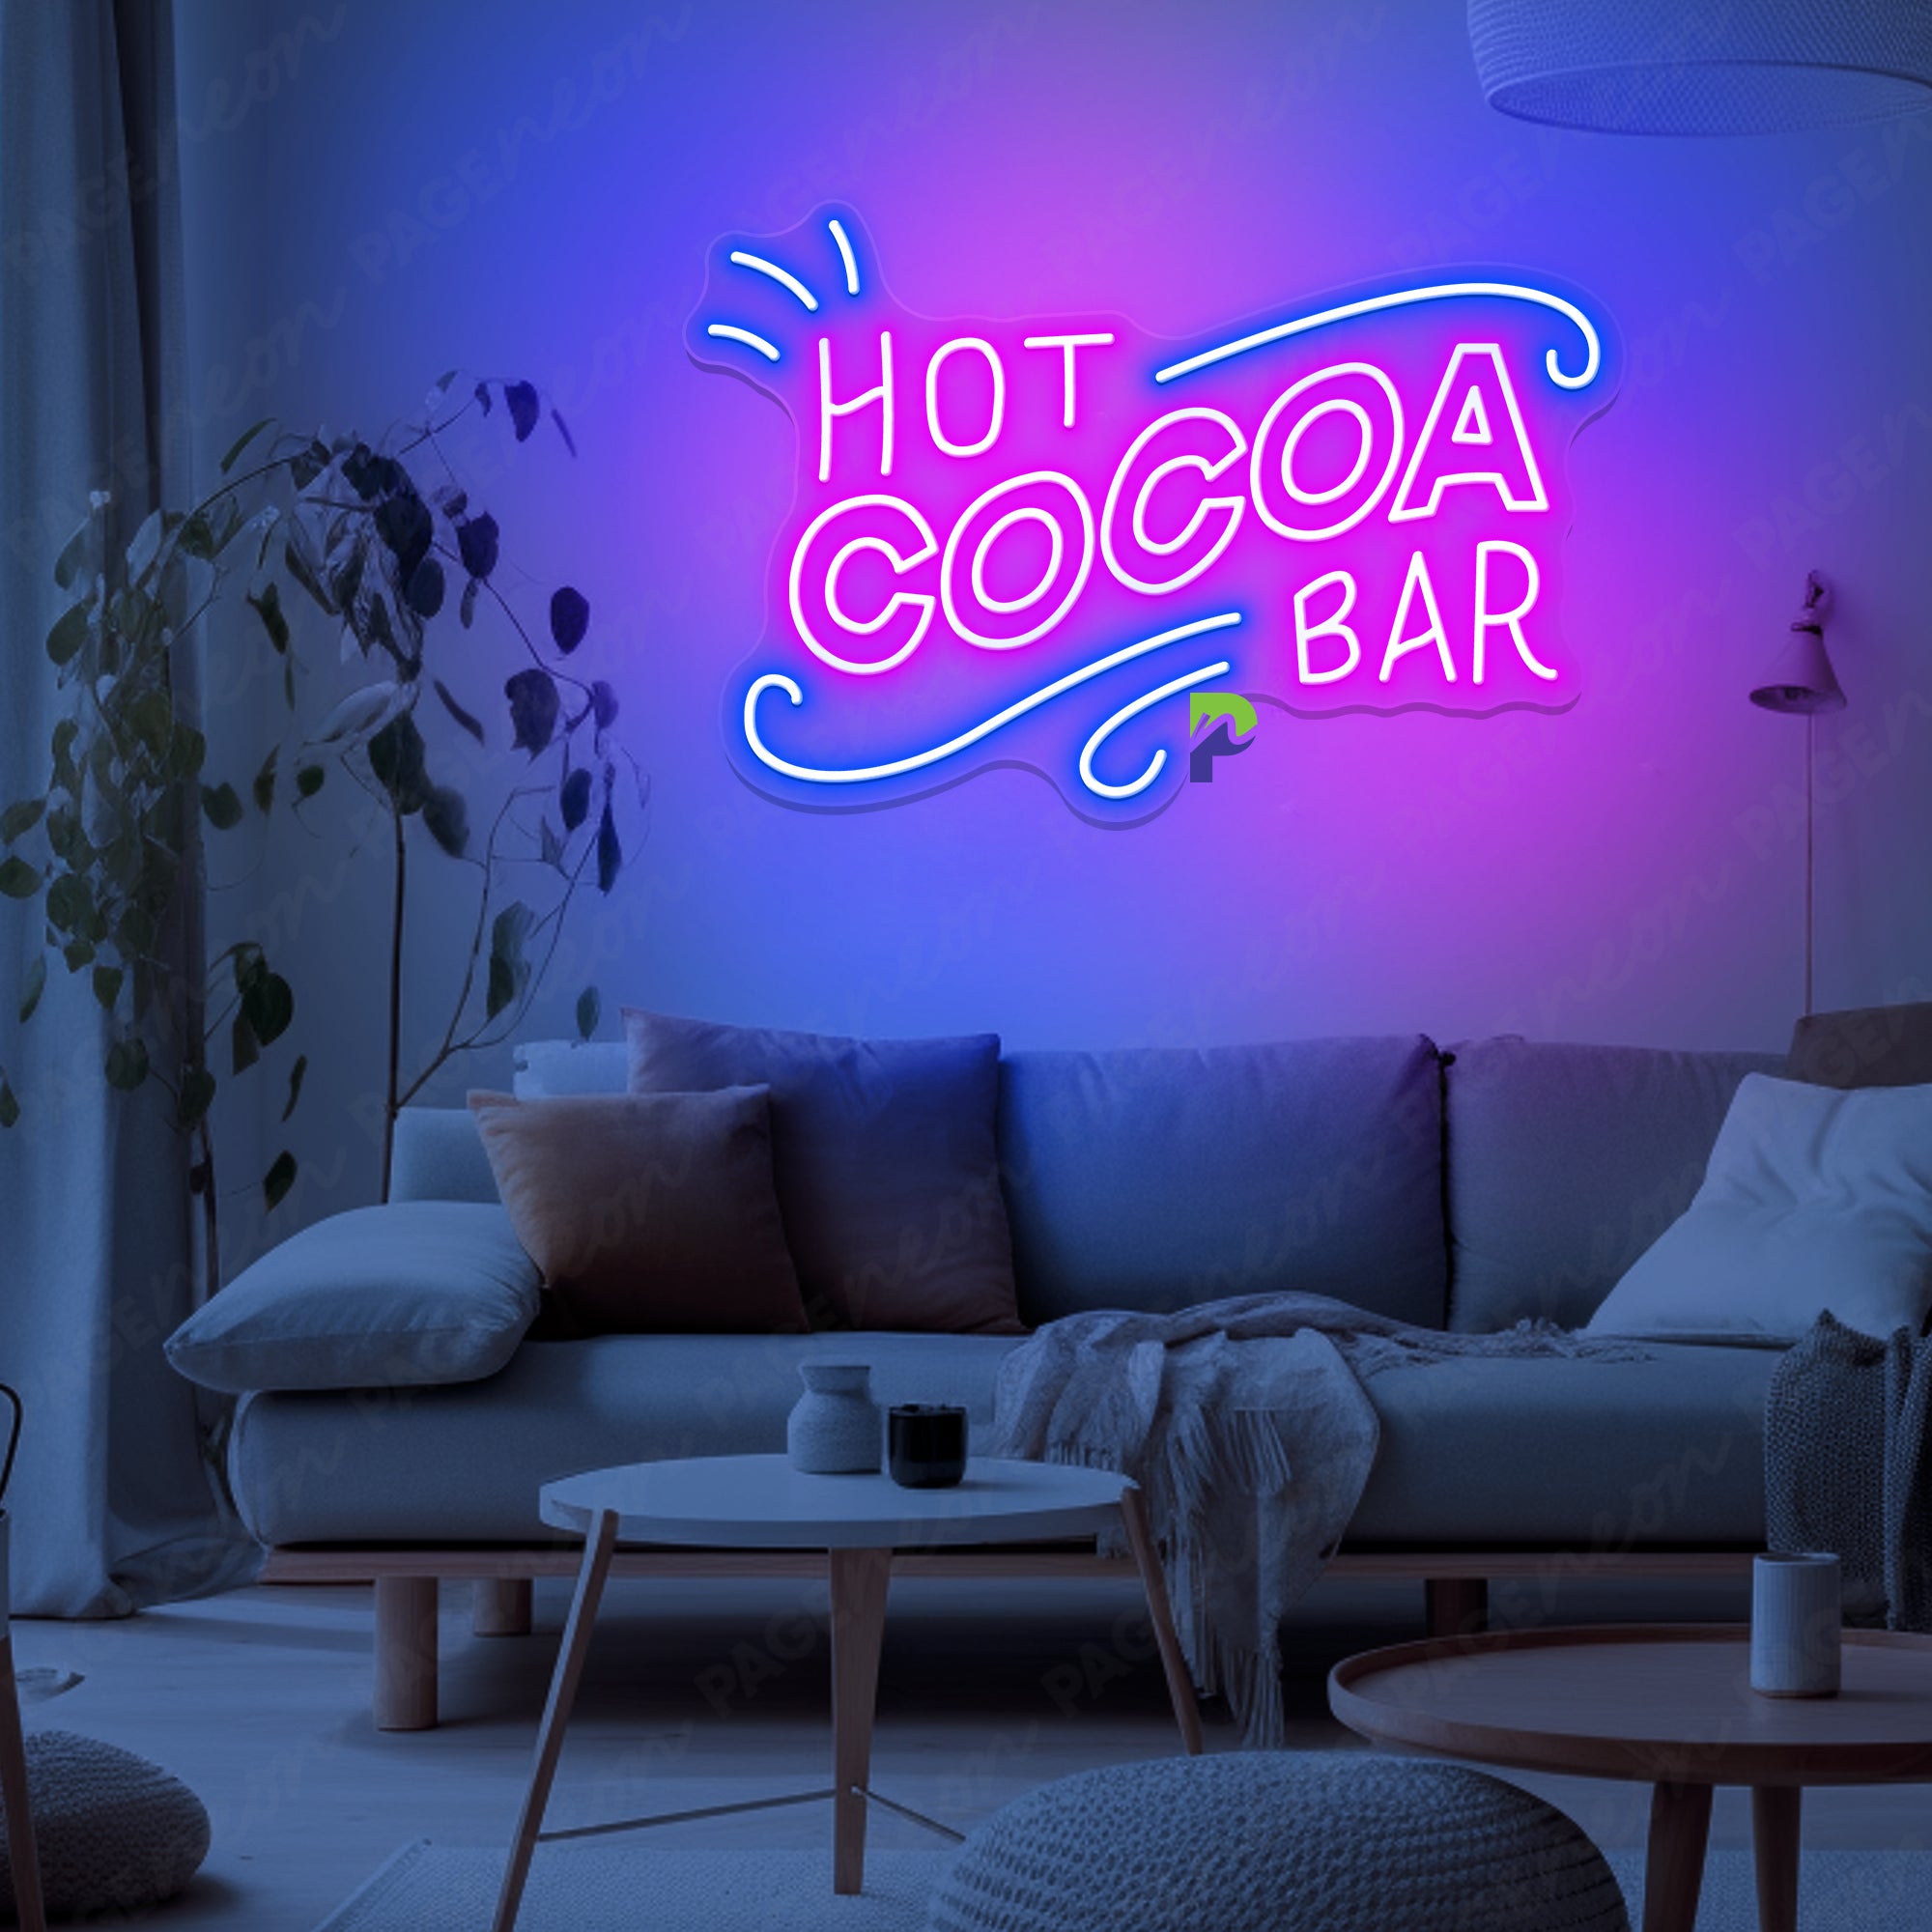 Hot Cocoa Bar Neon Sign Art Word Led Light For Cafe